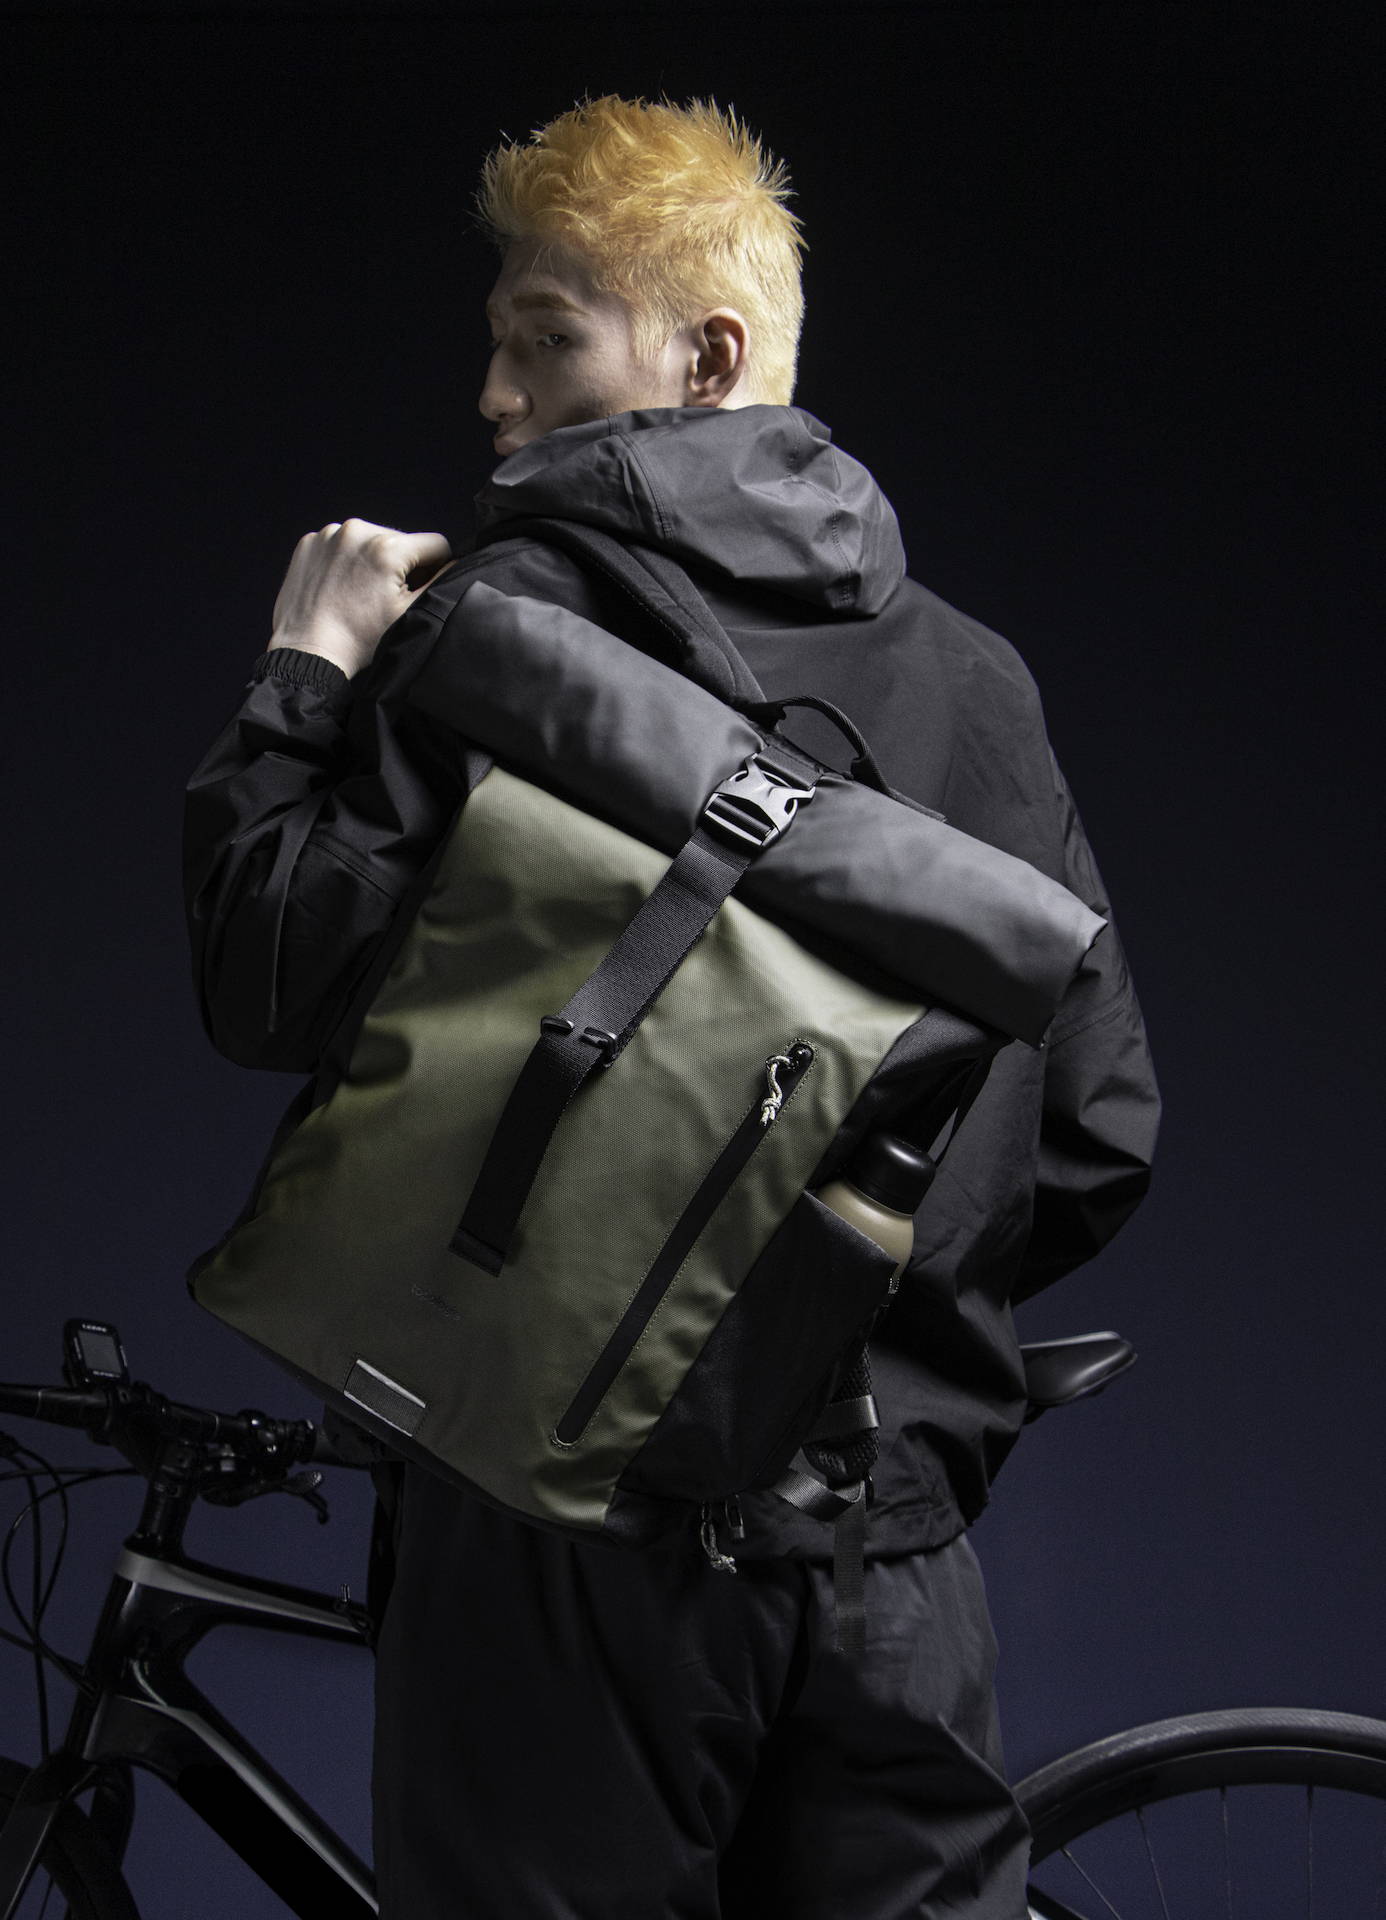 topologie バックパック/ bags haul backpack 2.0